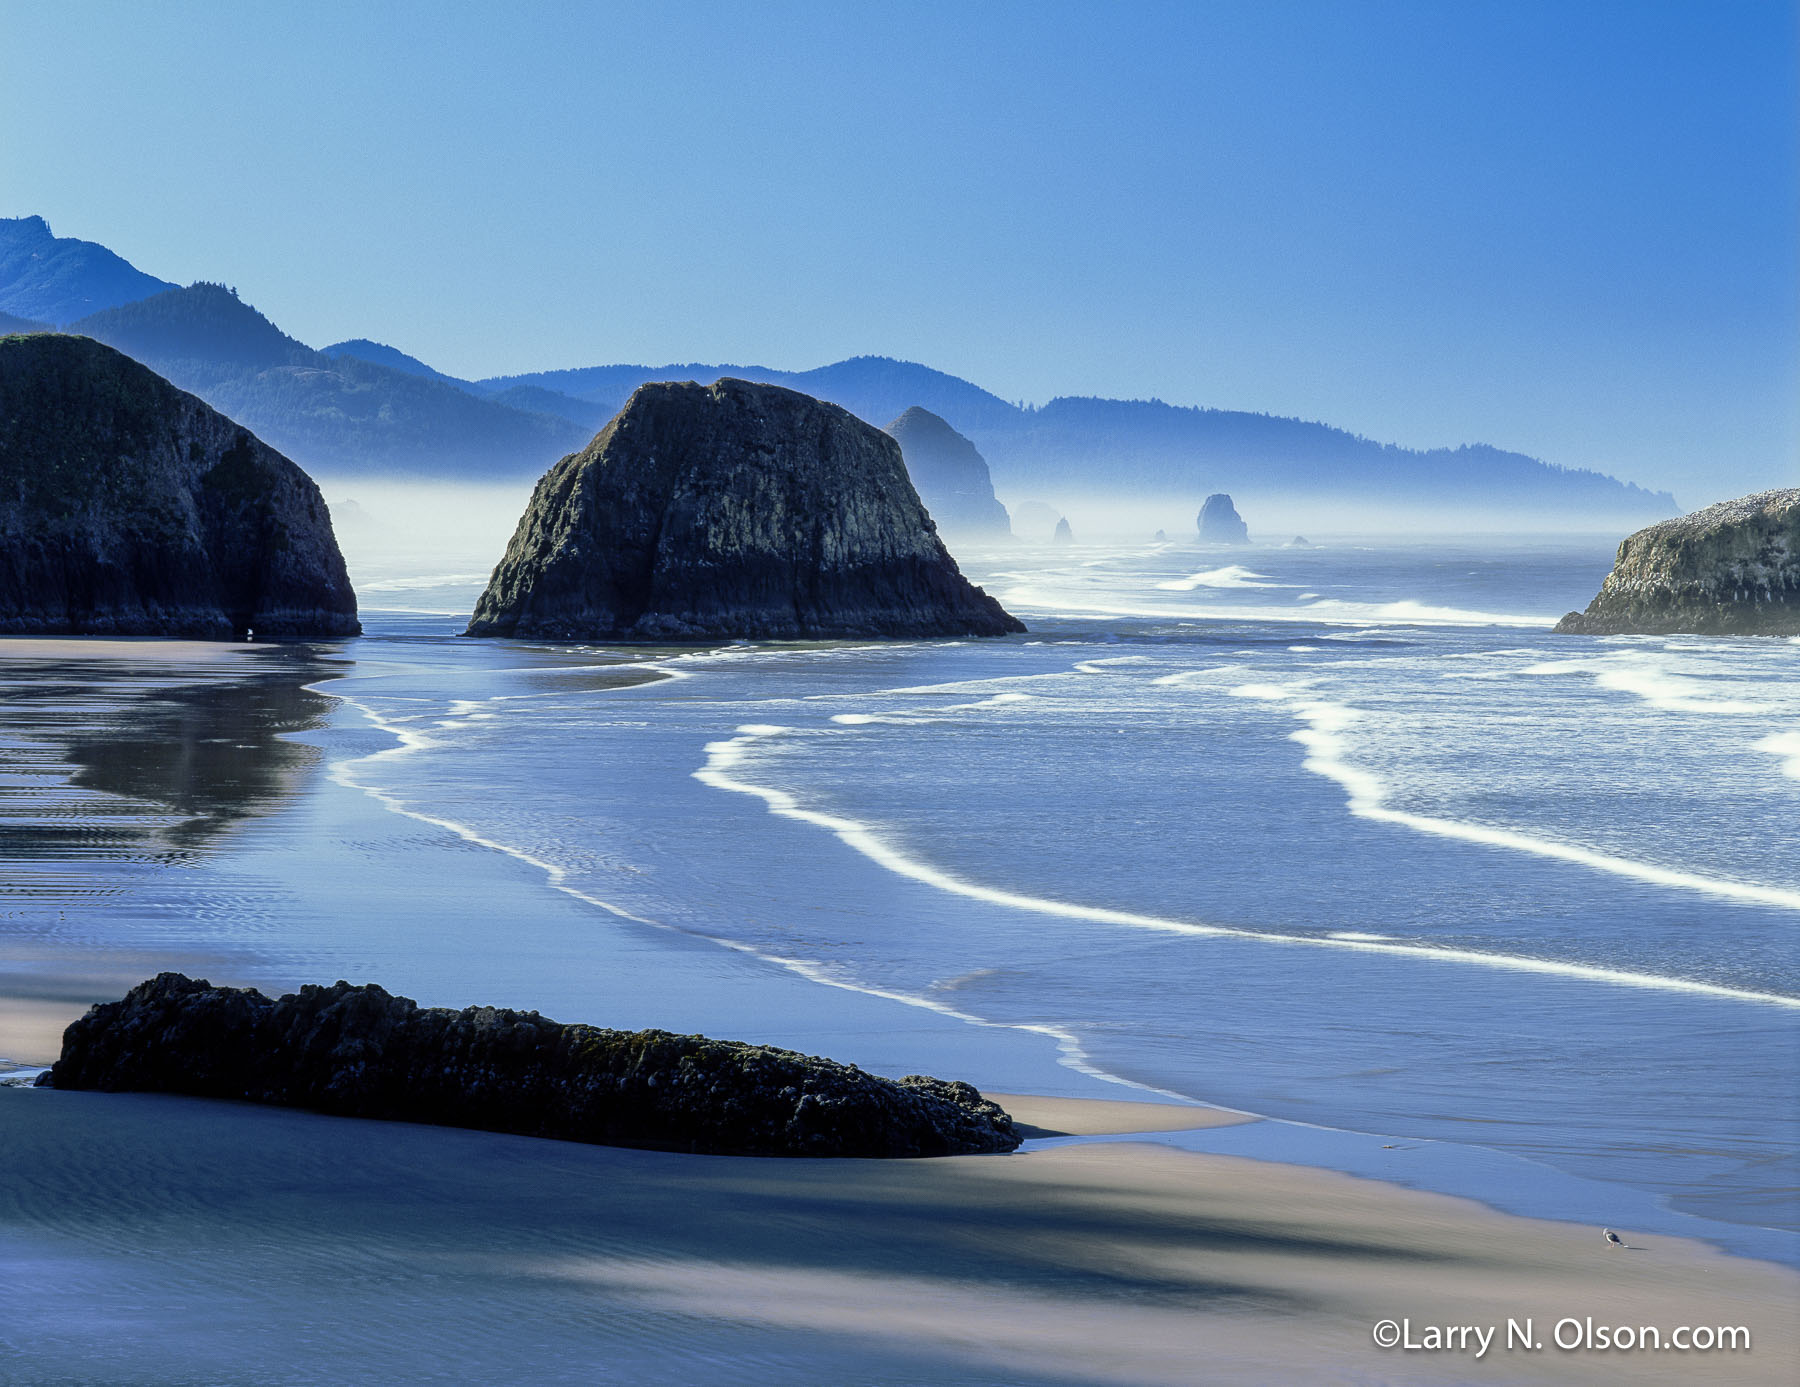 Low Tide 2, Ecola State Park, Oregon | The surf rolls into Crescent beach and haystack rocks at low tide.